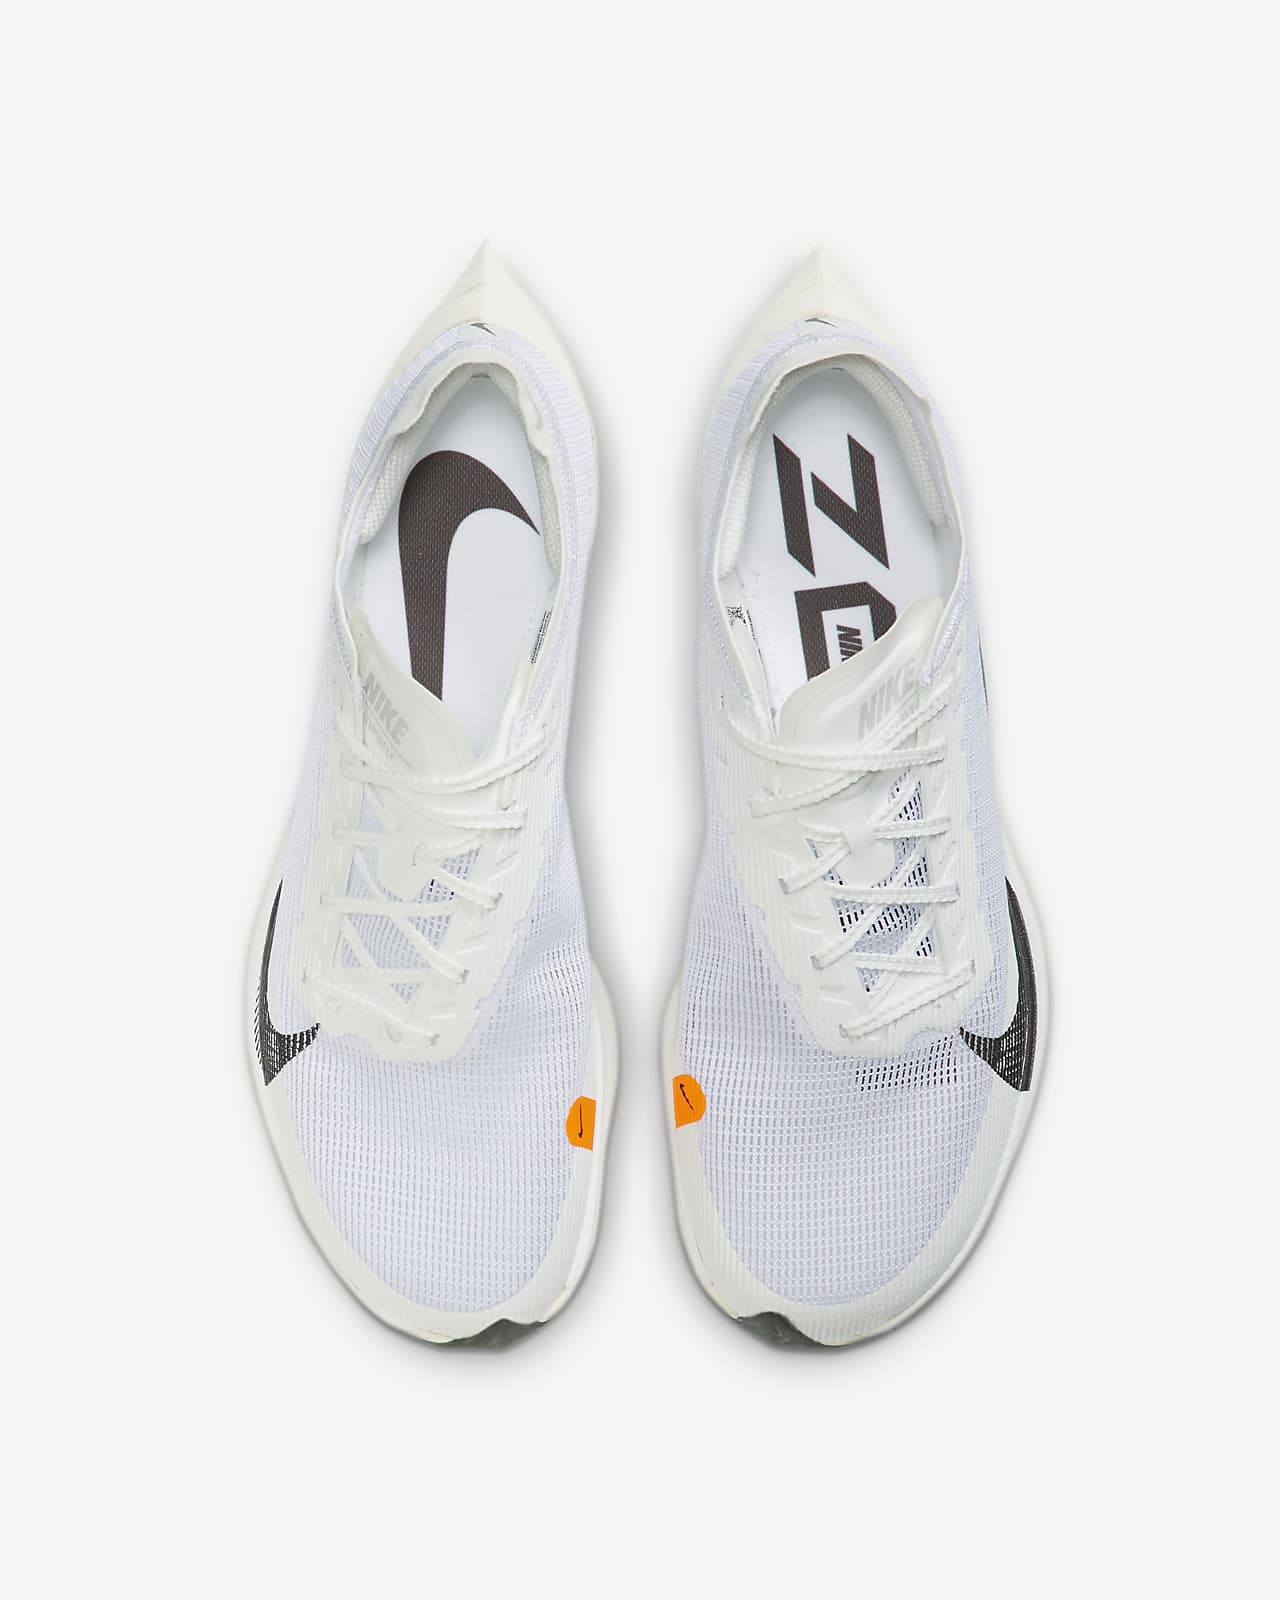 weight of nike vaporfly next